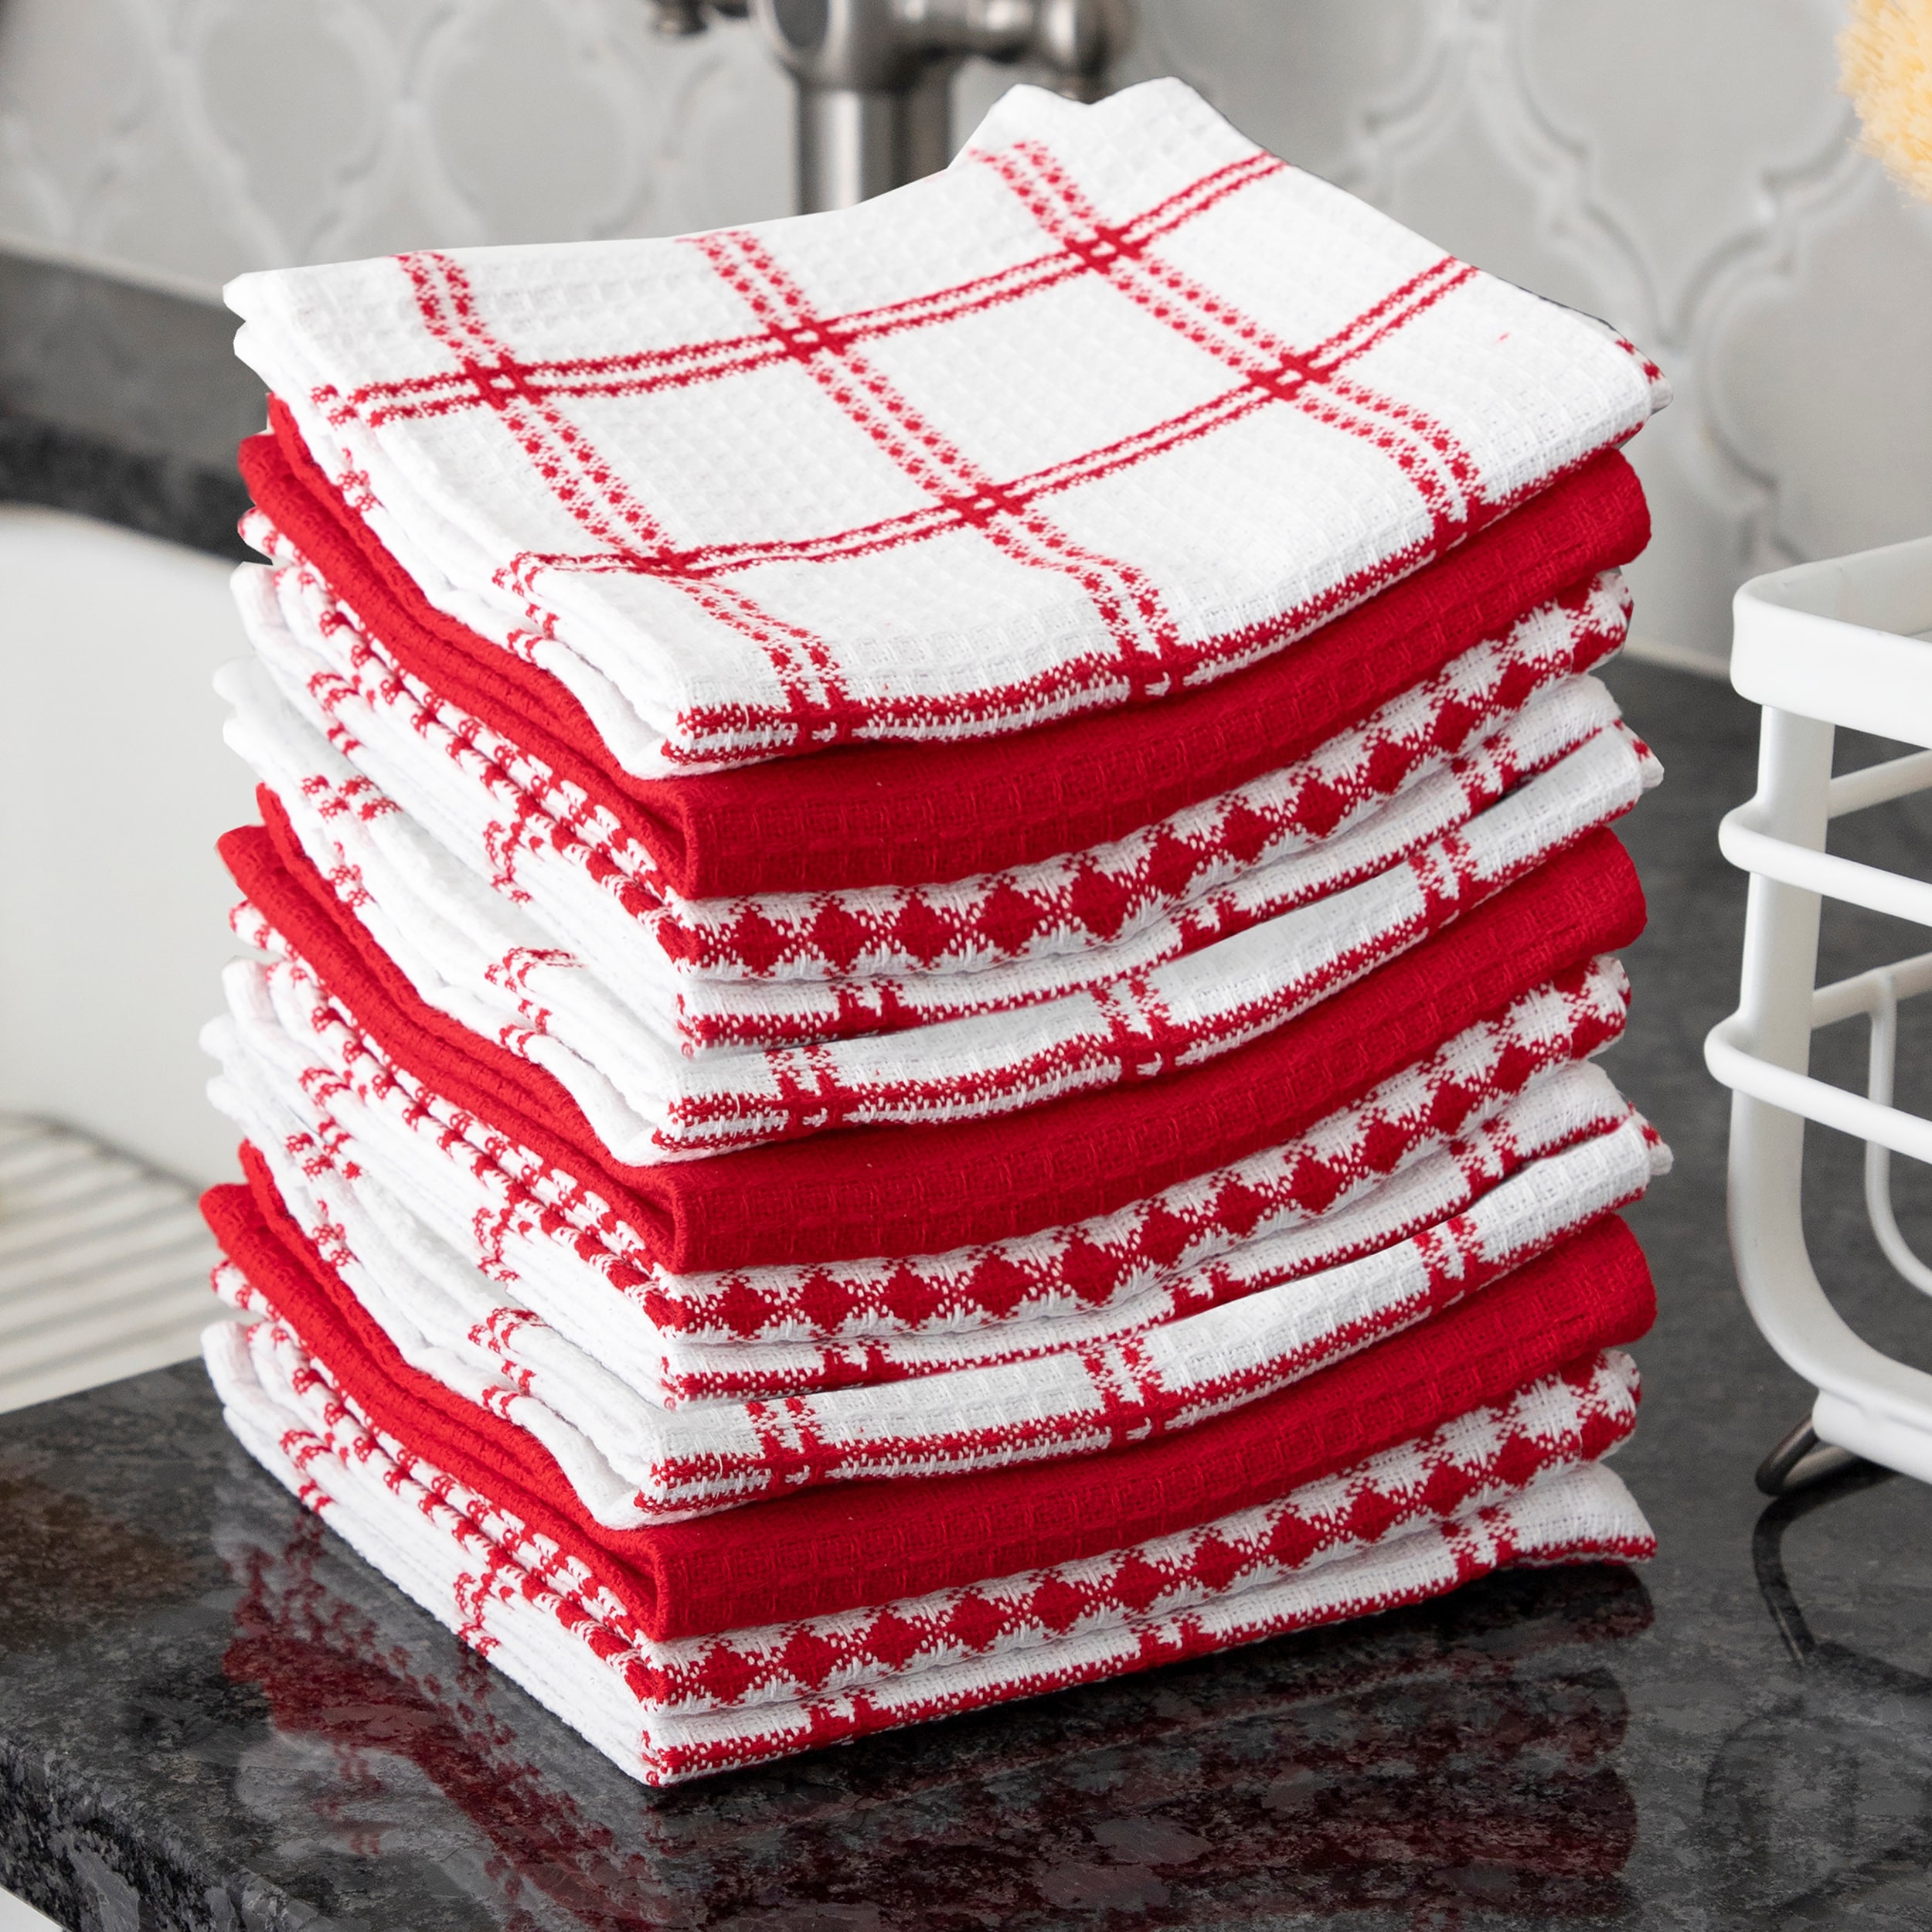 https://ak1.ostkcdn.com/images/products/is/images/direct/96bff90bc04d1bfa3af66cbbf2eaa9cbc2c14881/T-fal-Textiles-12-Pack-Flat-Waffle-Cotton-Kitchen-Dish-Cloth-Set.jpg